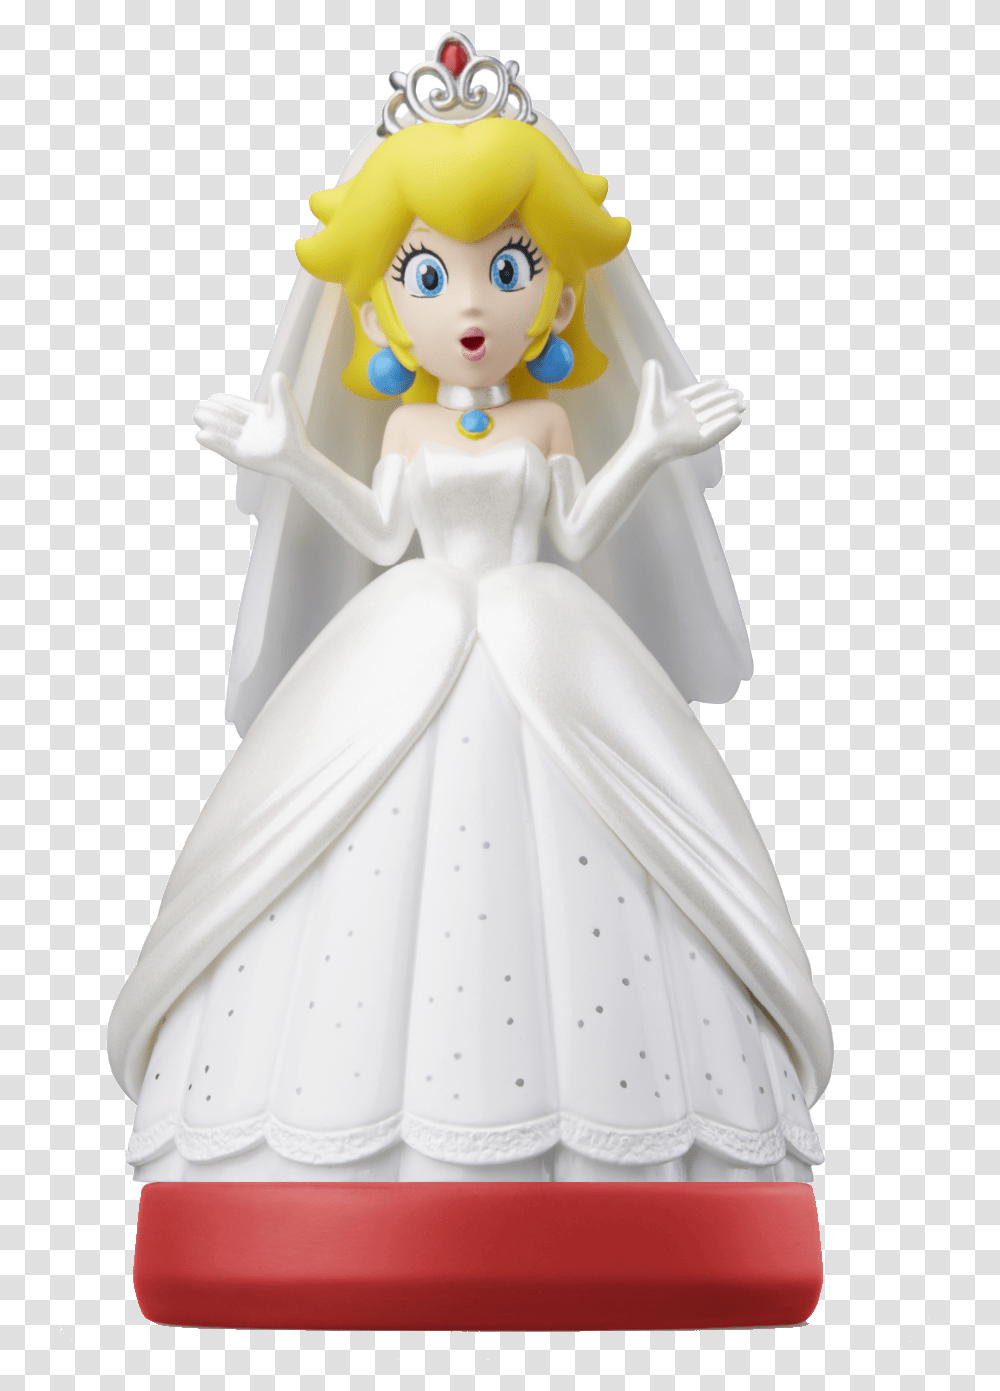 Metroid Fire Emblem Amp Botw Champions Amiibo And A Super Mario Odyssey Peach Wedding Dress, Figurine, Toy, Person, Human Transparent Png